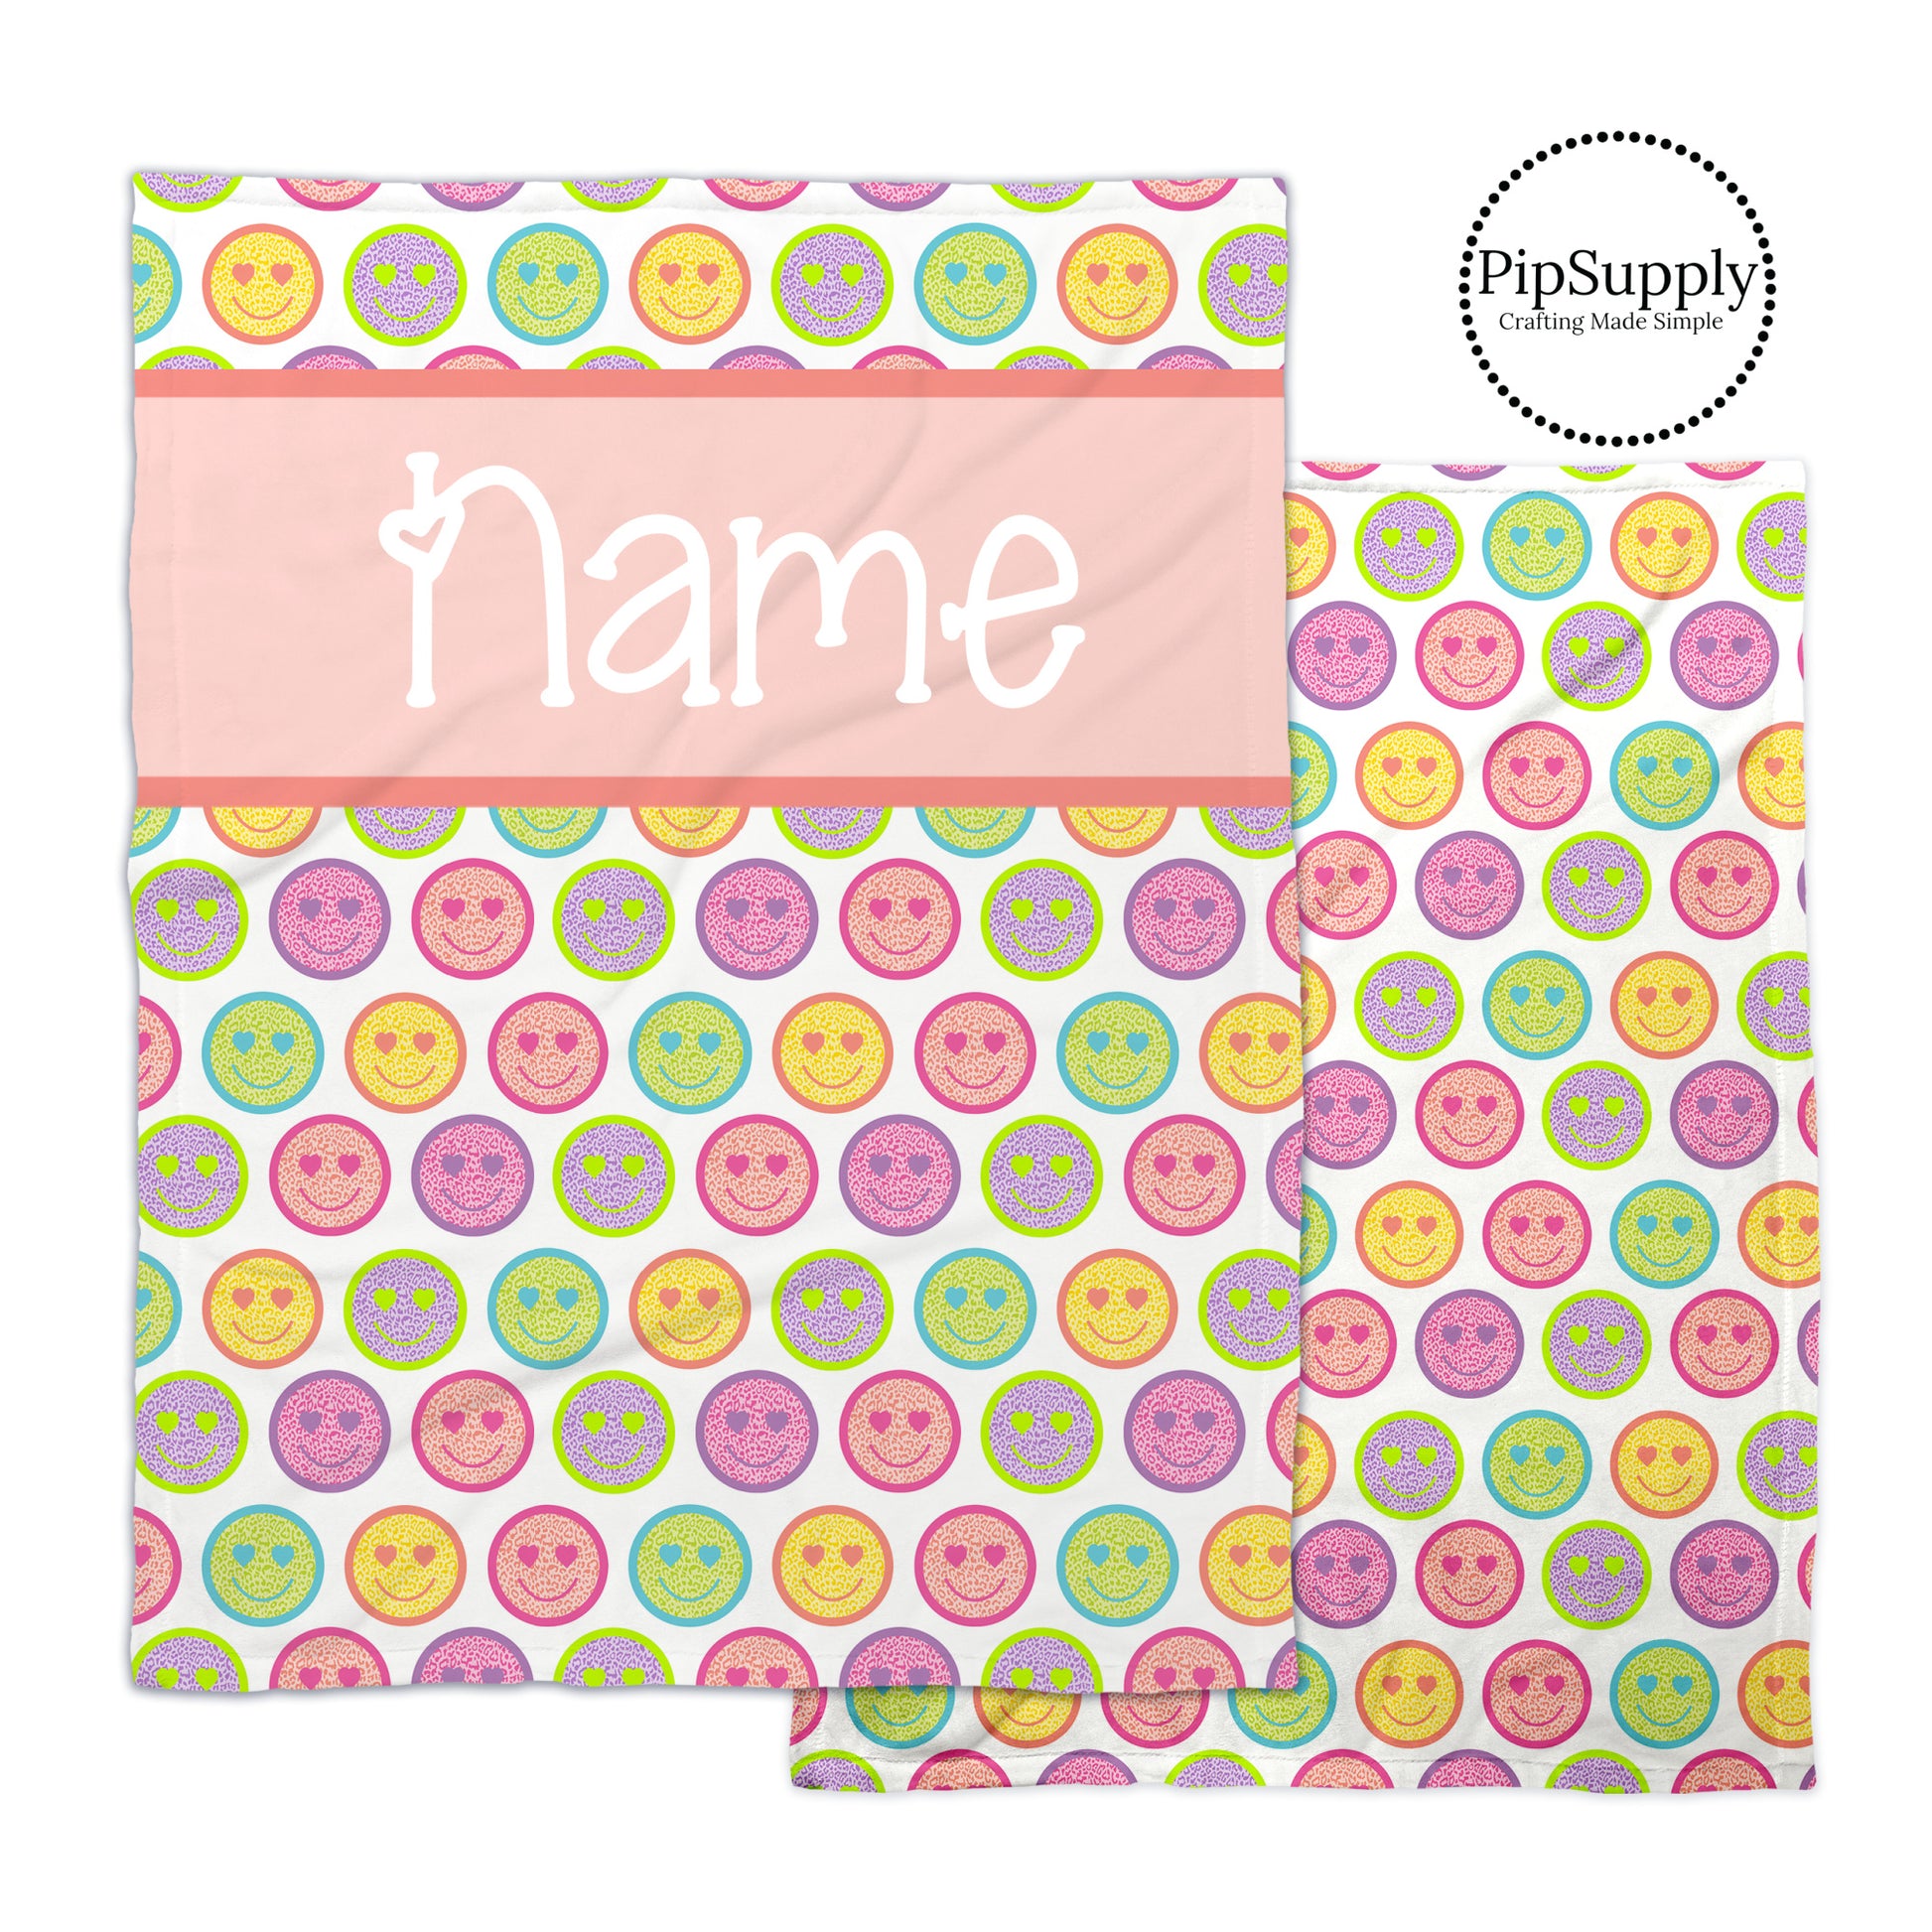 Multi colored leopard print smiley face patterned soft minky blanket with customizable text.